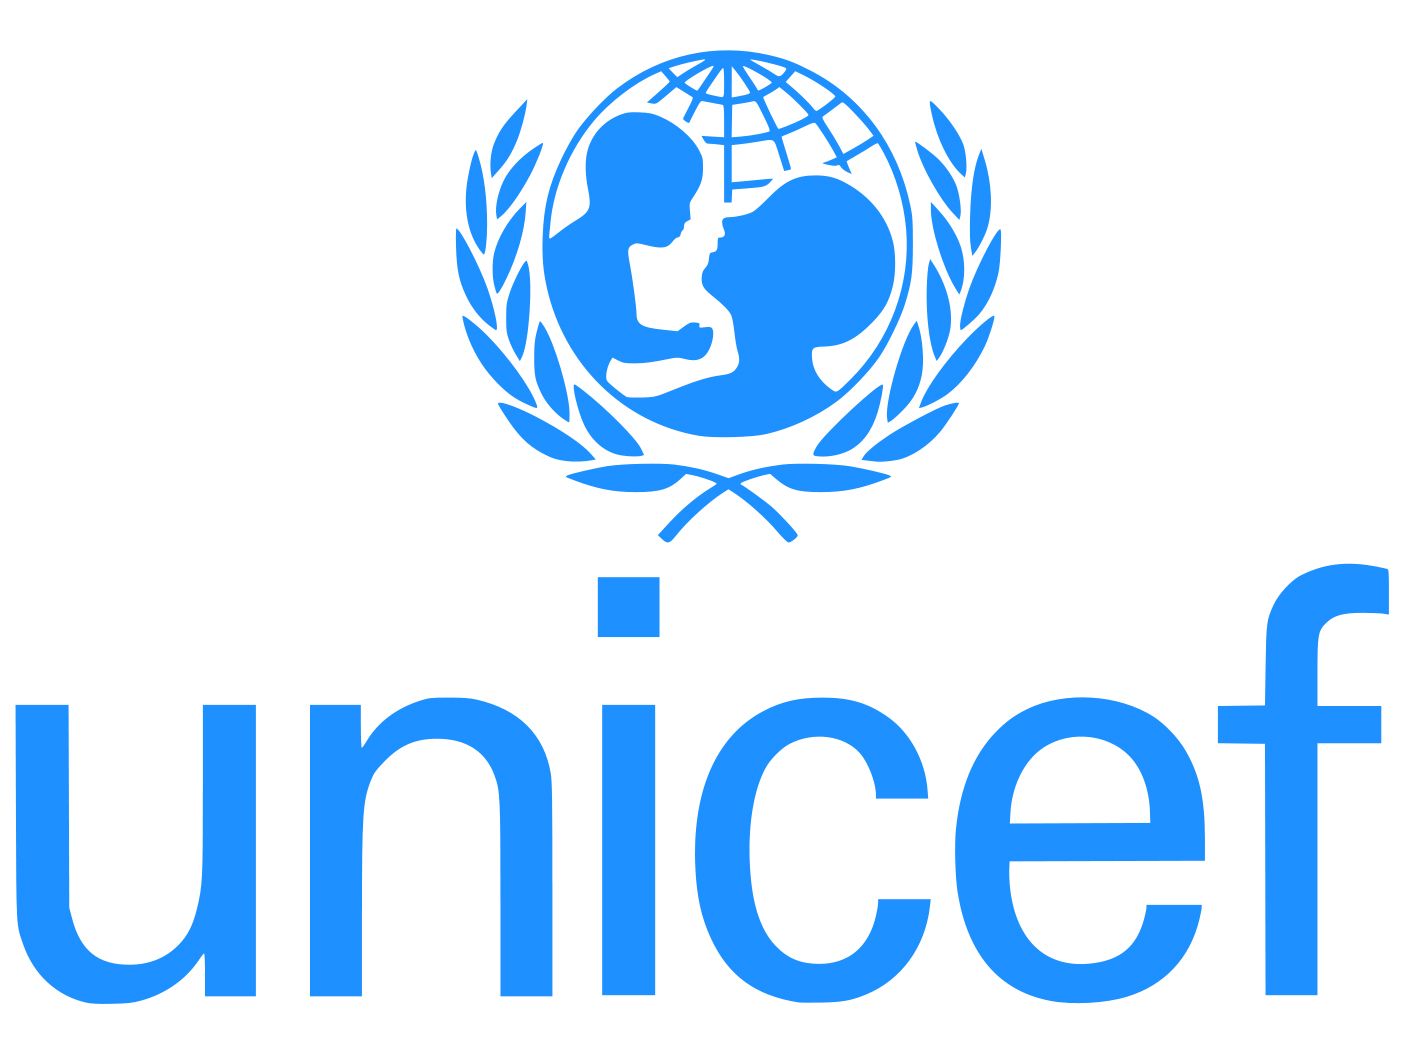 Communication Specialist - Exciting Opportunity At Unicef